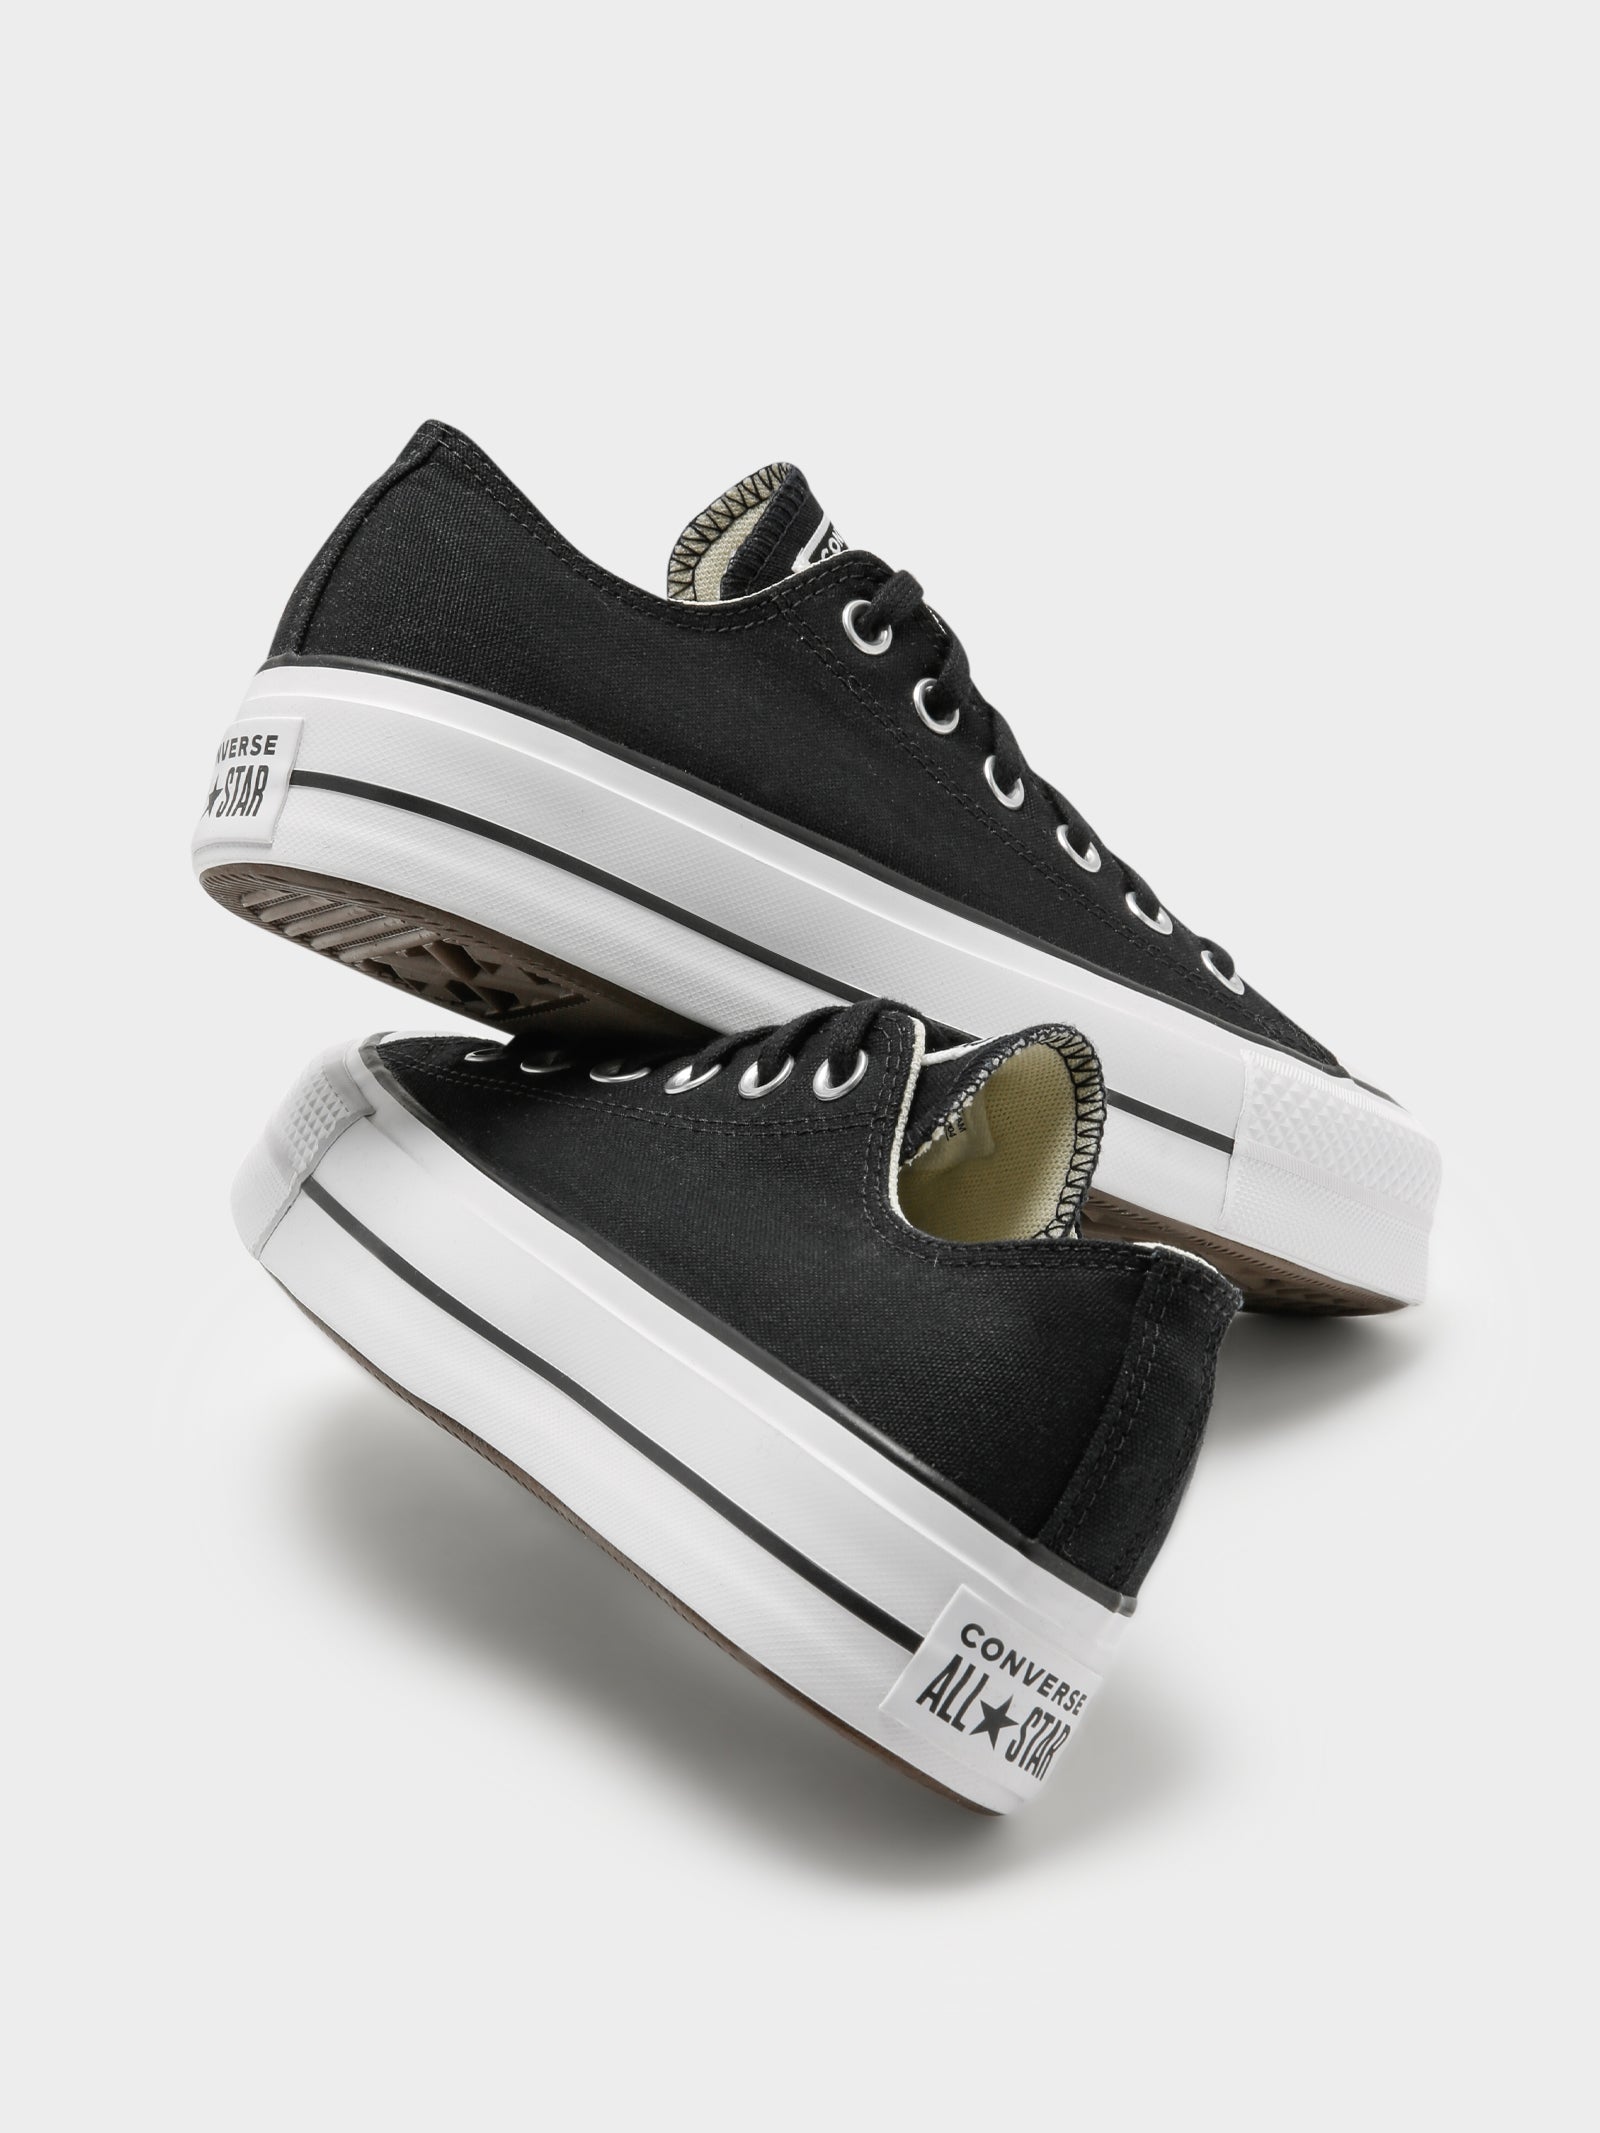 Vibrere Watchful Du bliver bedre Womens Chuck Taylor All Star Lift Low-Top Platform Sneakers in Black & -  Glue Store